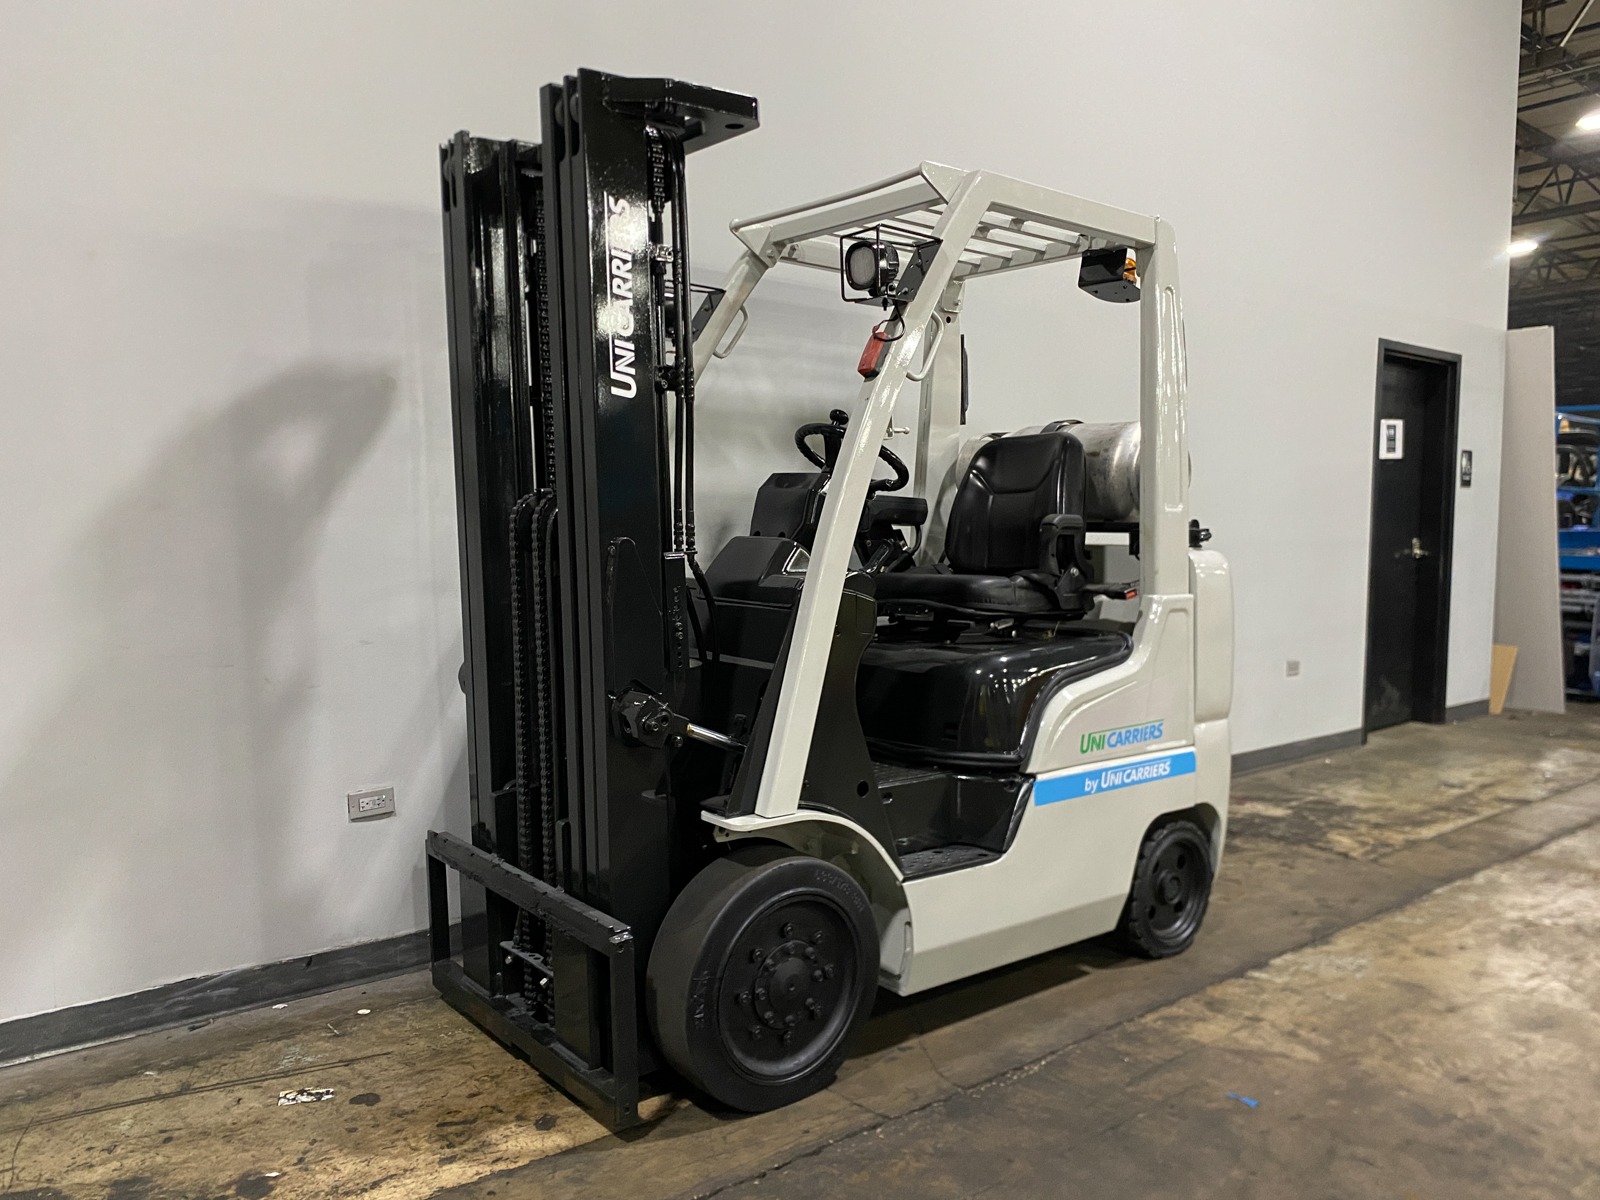 2018 UNICARRIERS MCP1F2A25LV - 123Forklift